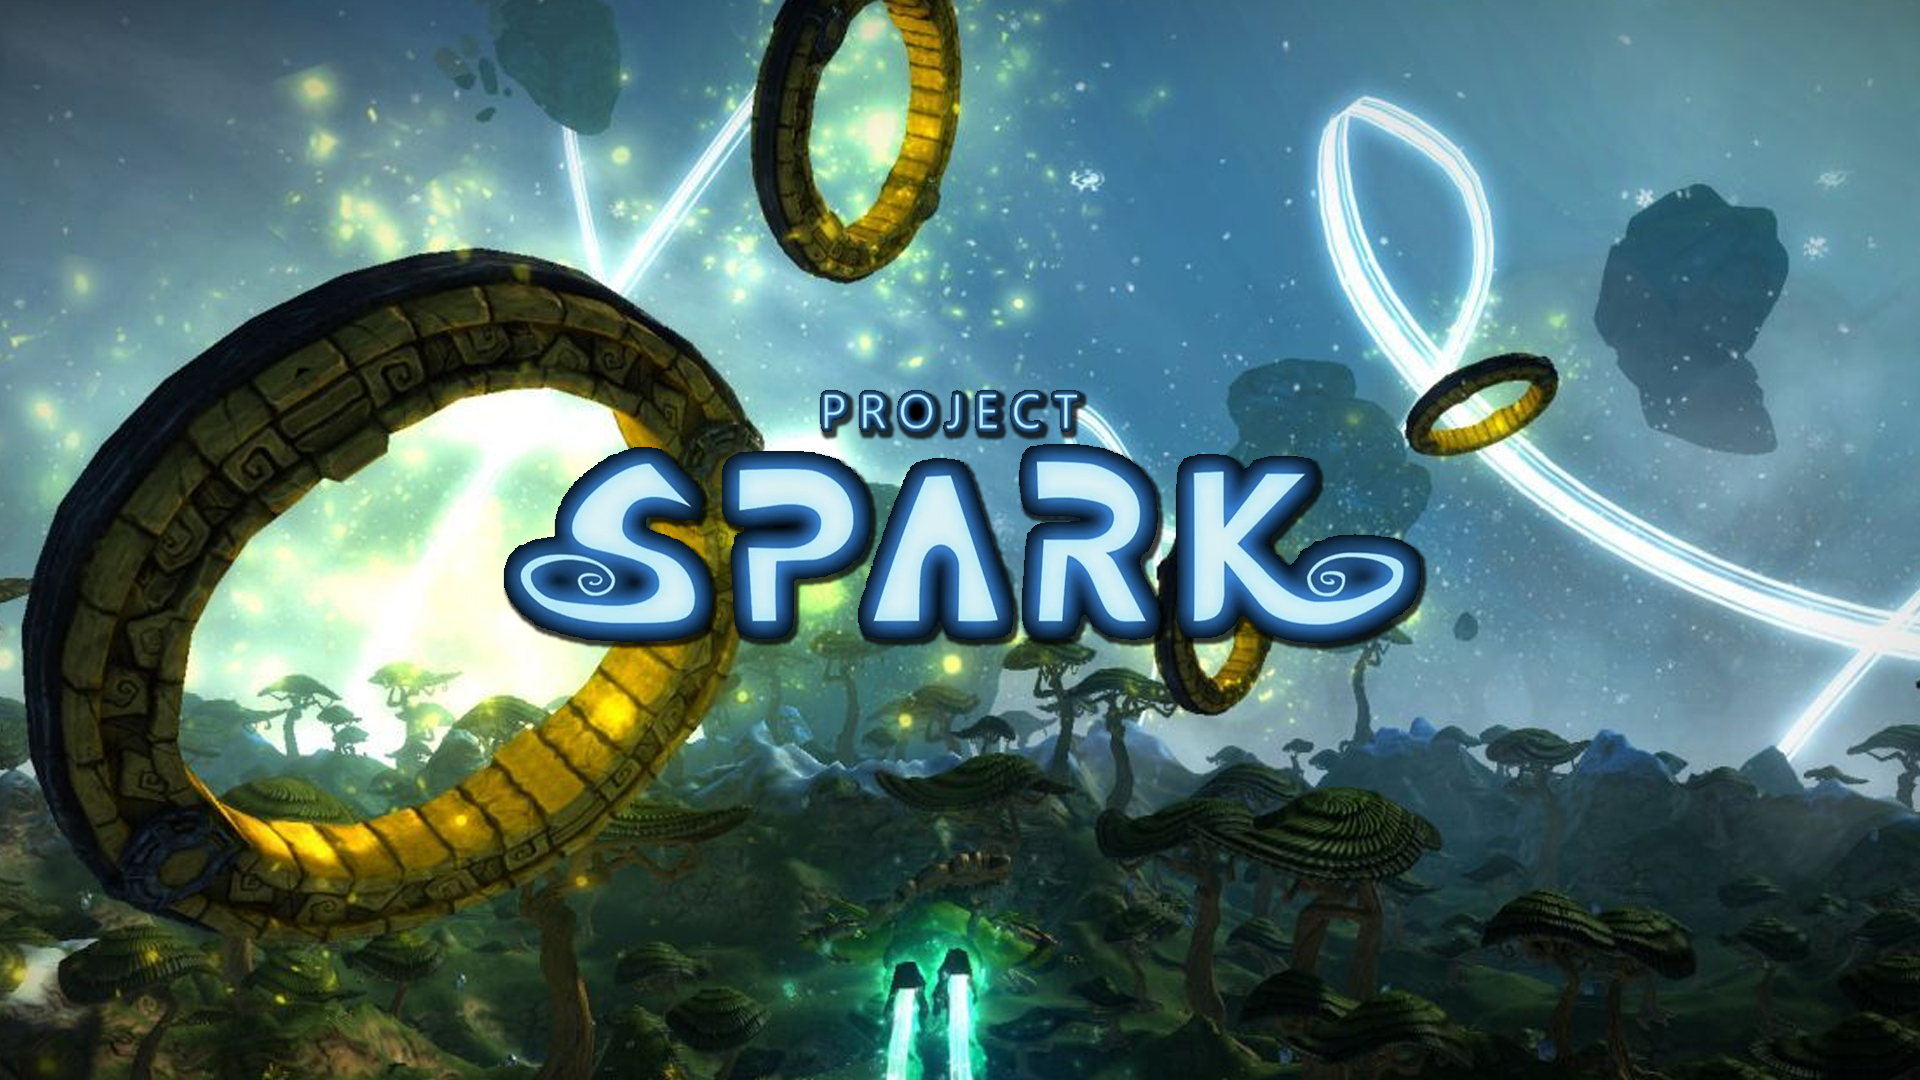 Project Spark Wallpaper 34681 1920x1080 px